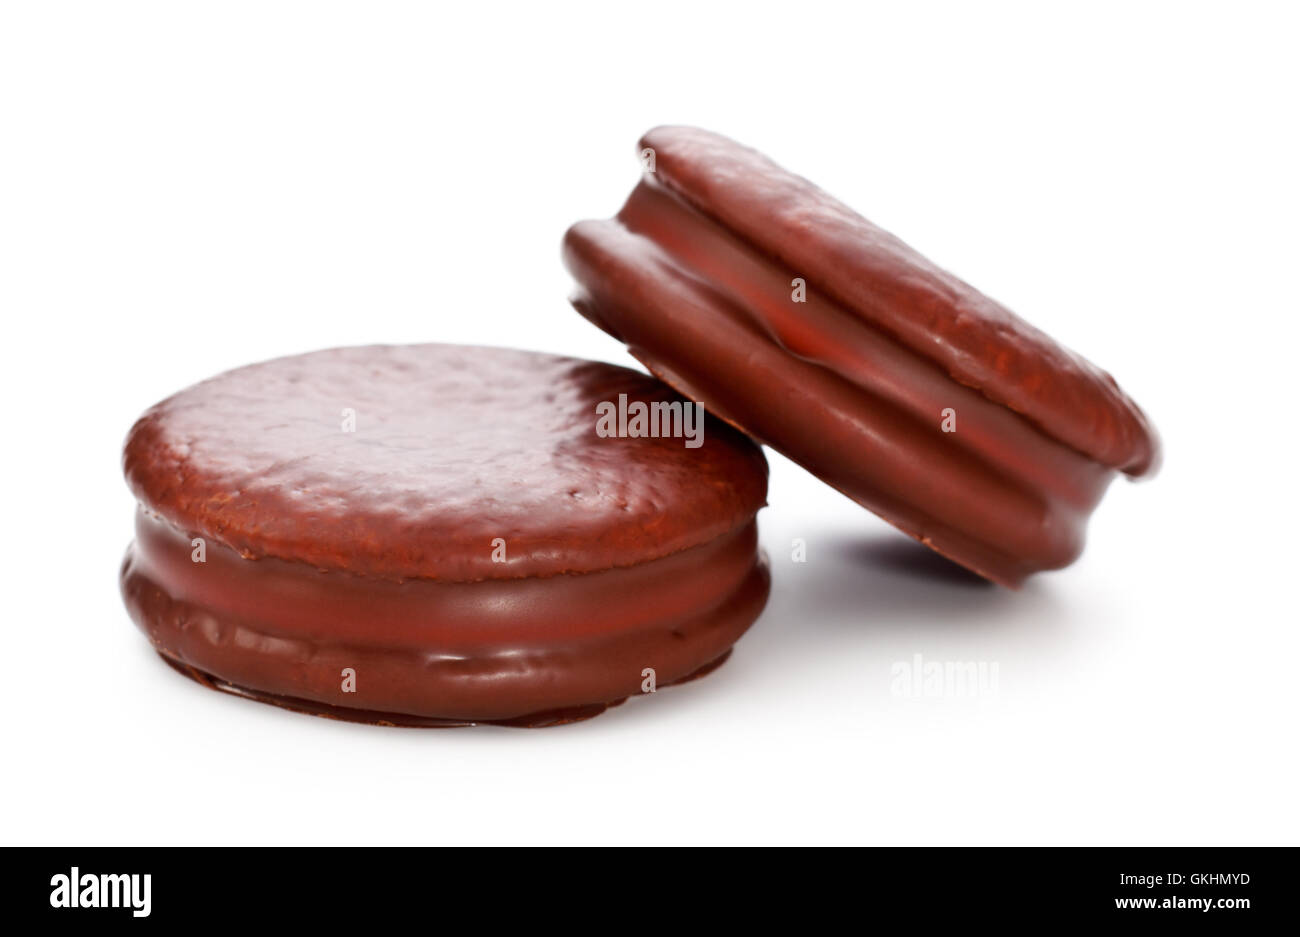 Chocolate Sandwitch Biscuits Stock Photo